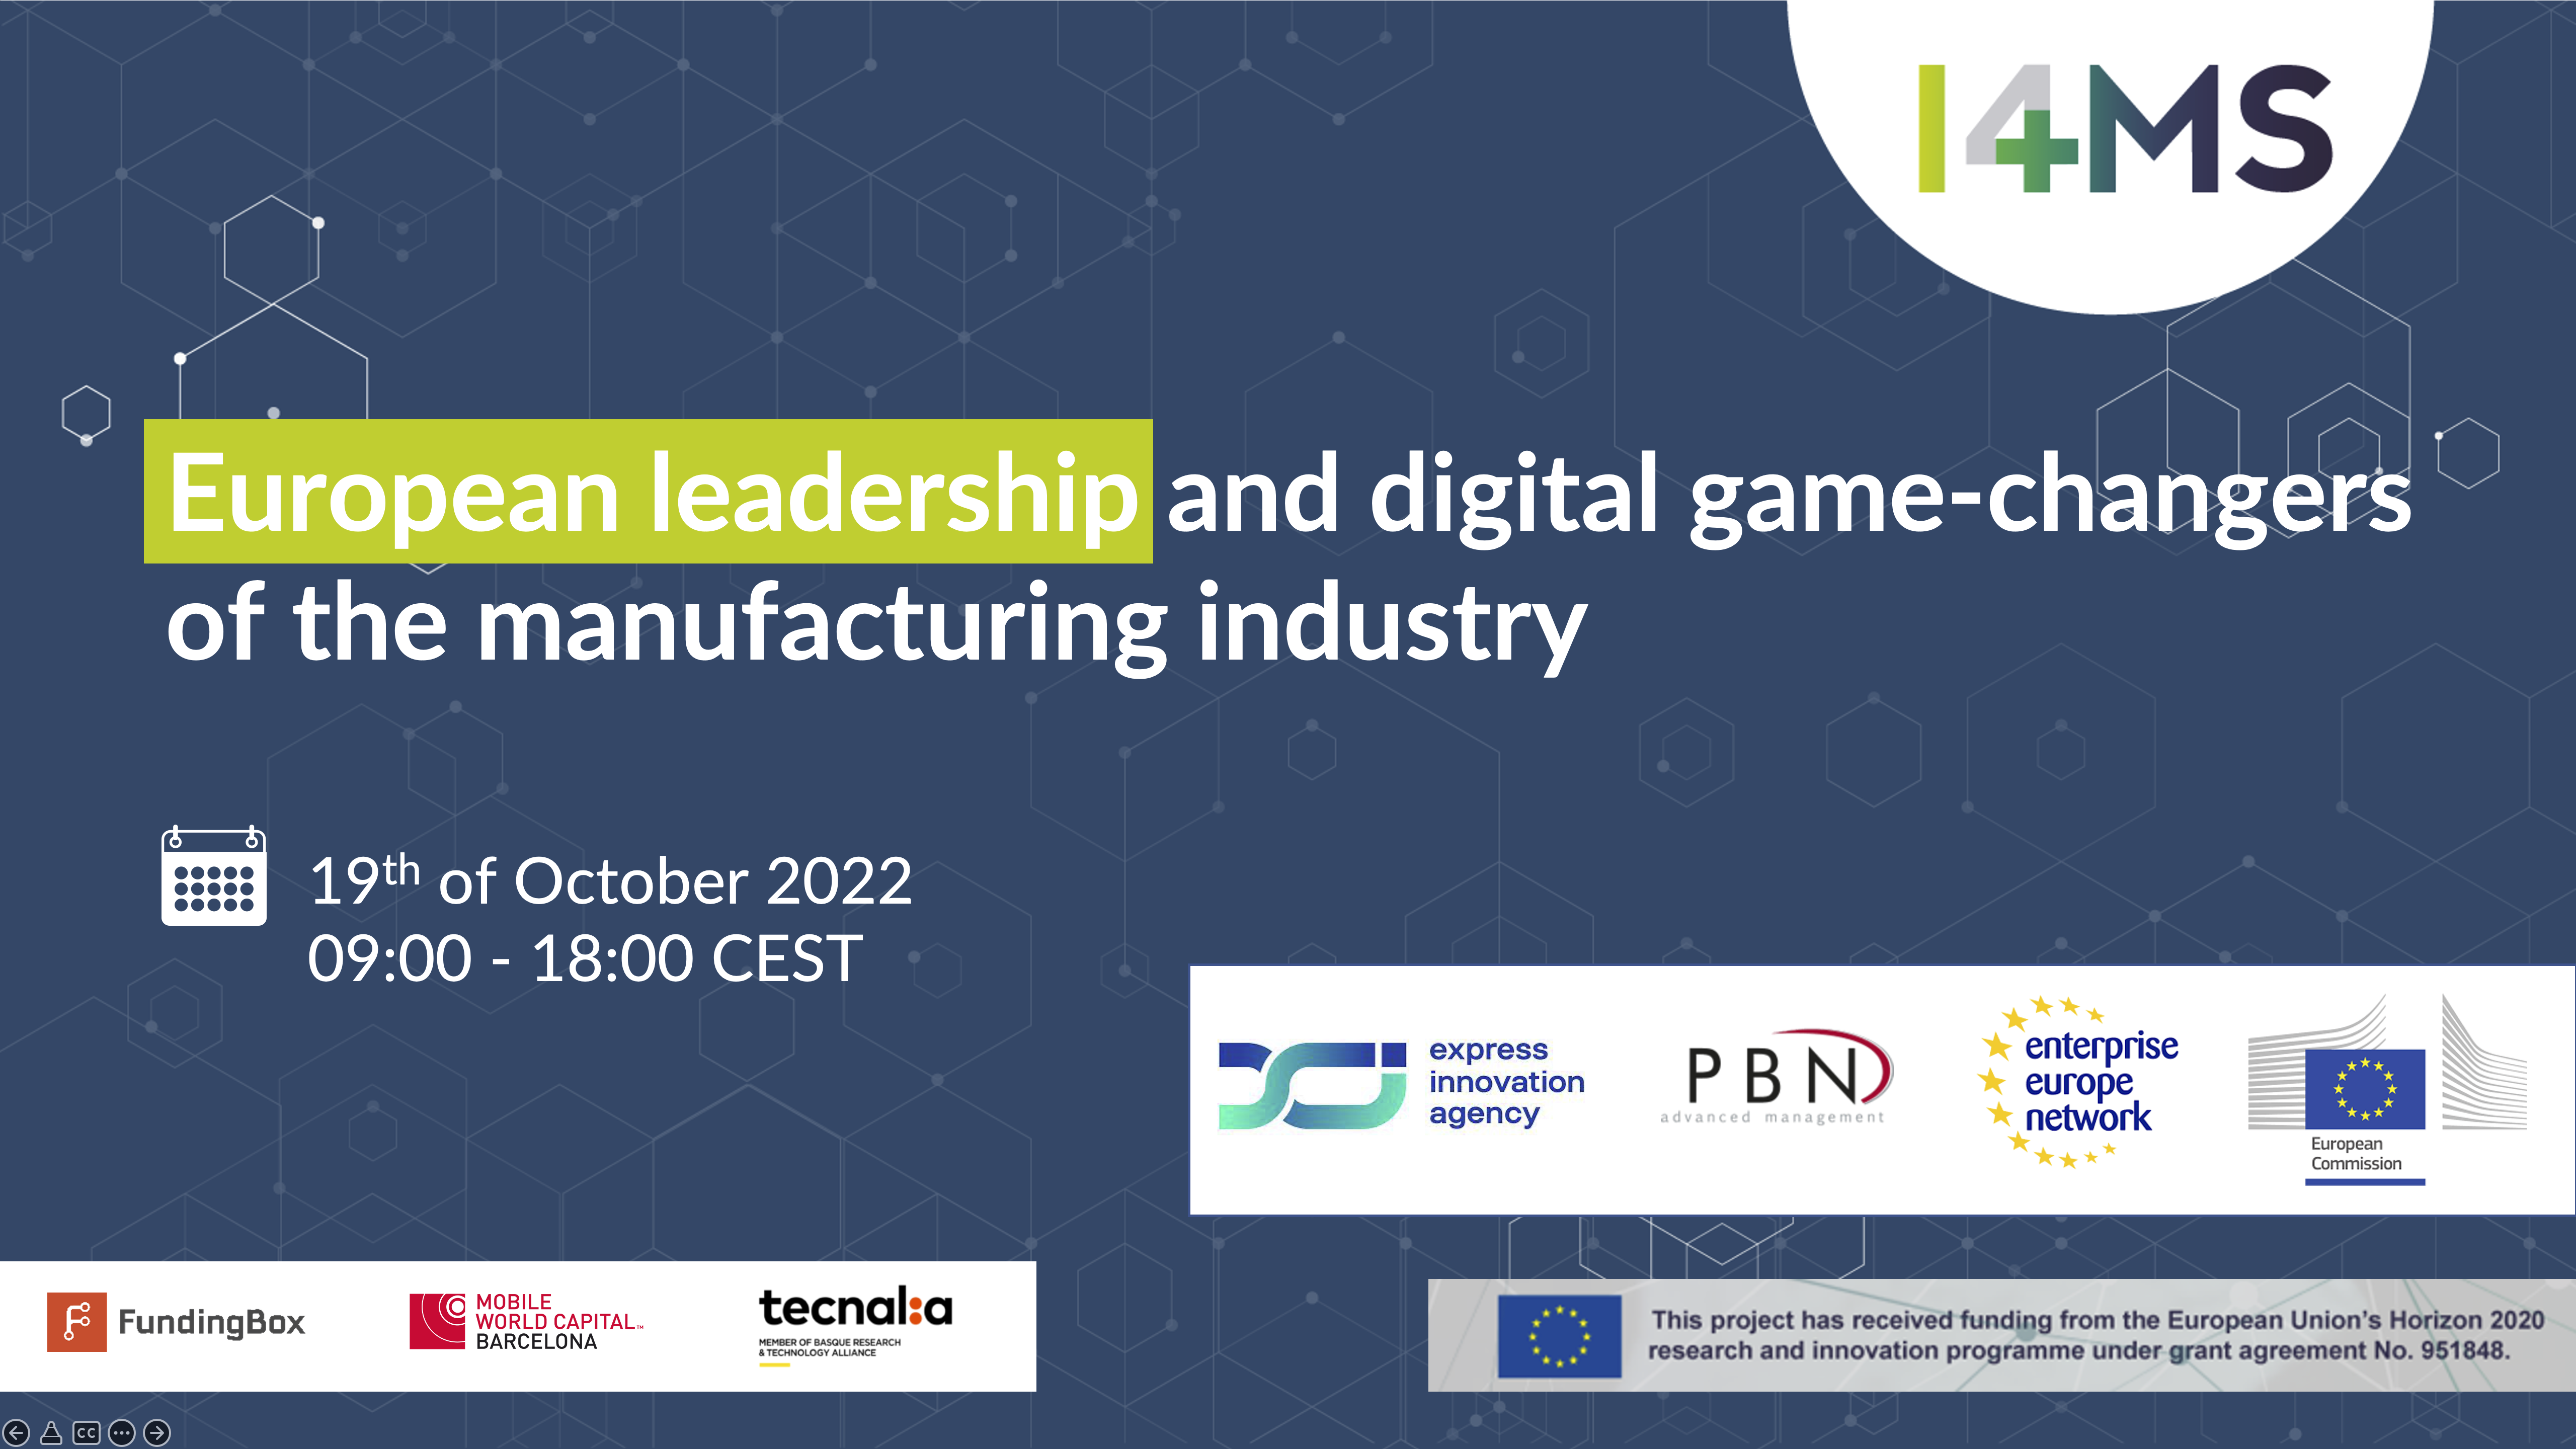 I4MS Stakeholders Event: European leadership and digital game-changers of the manufacturing industry